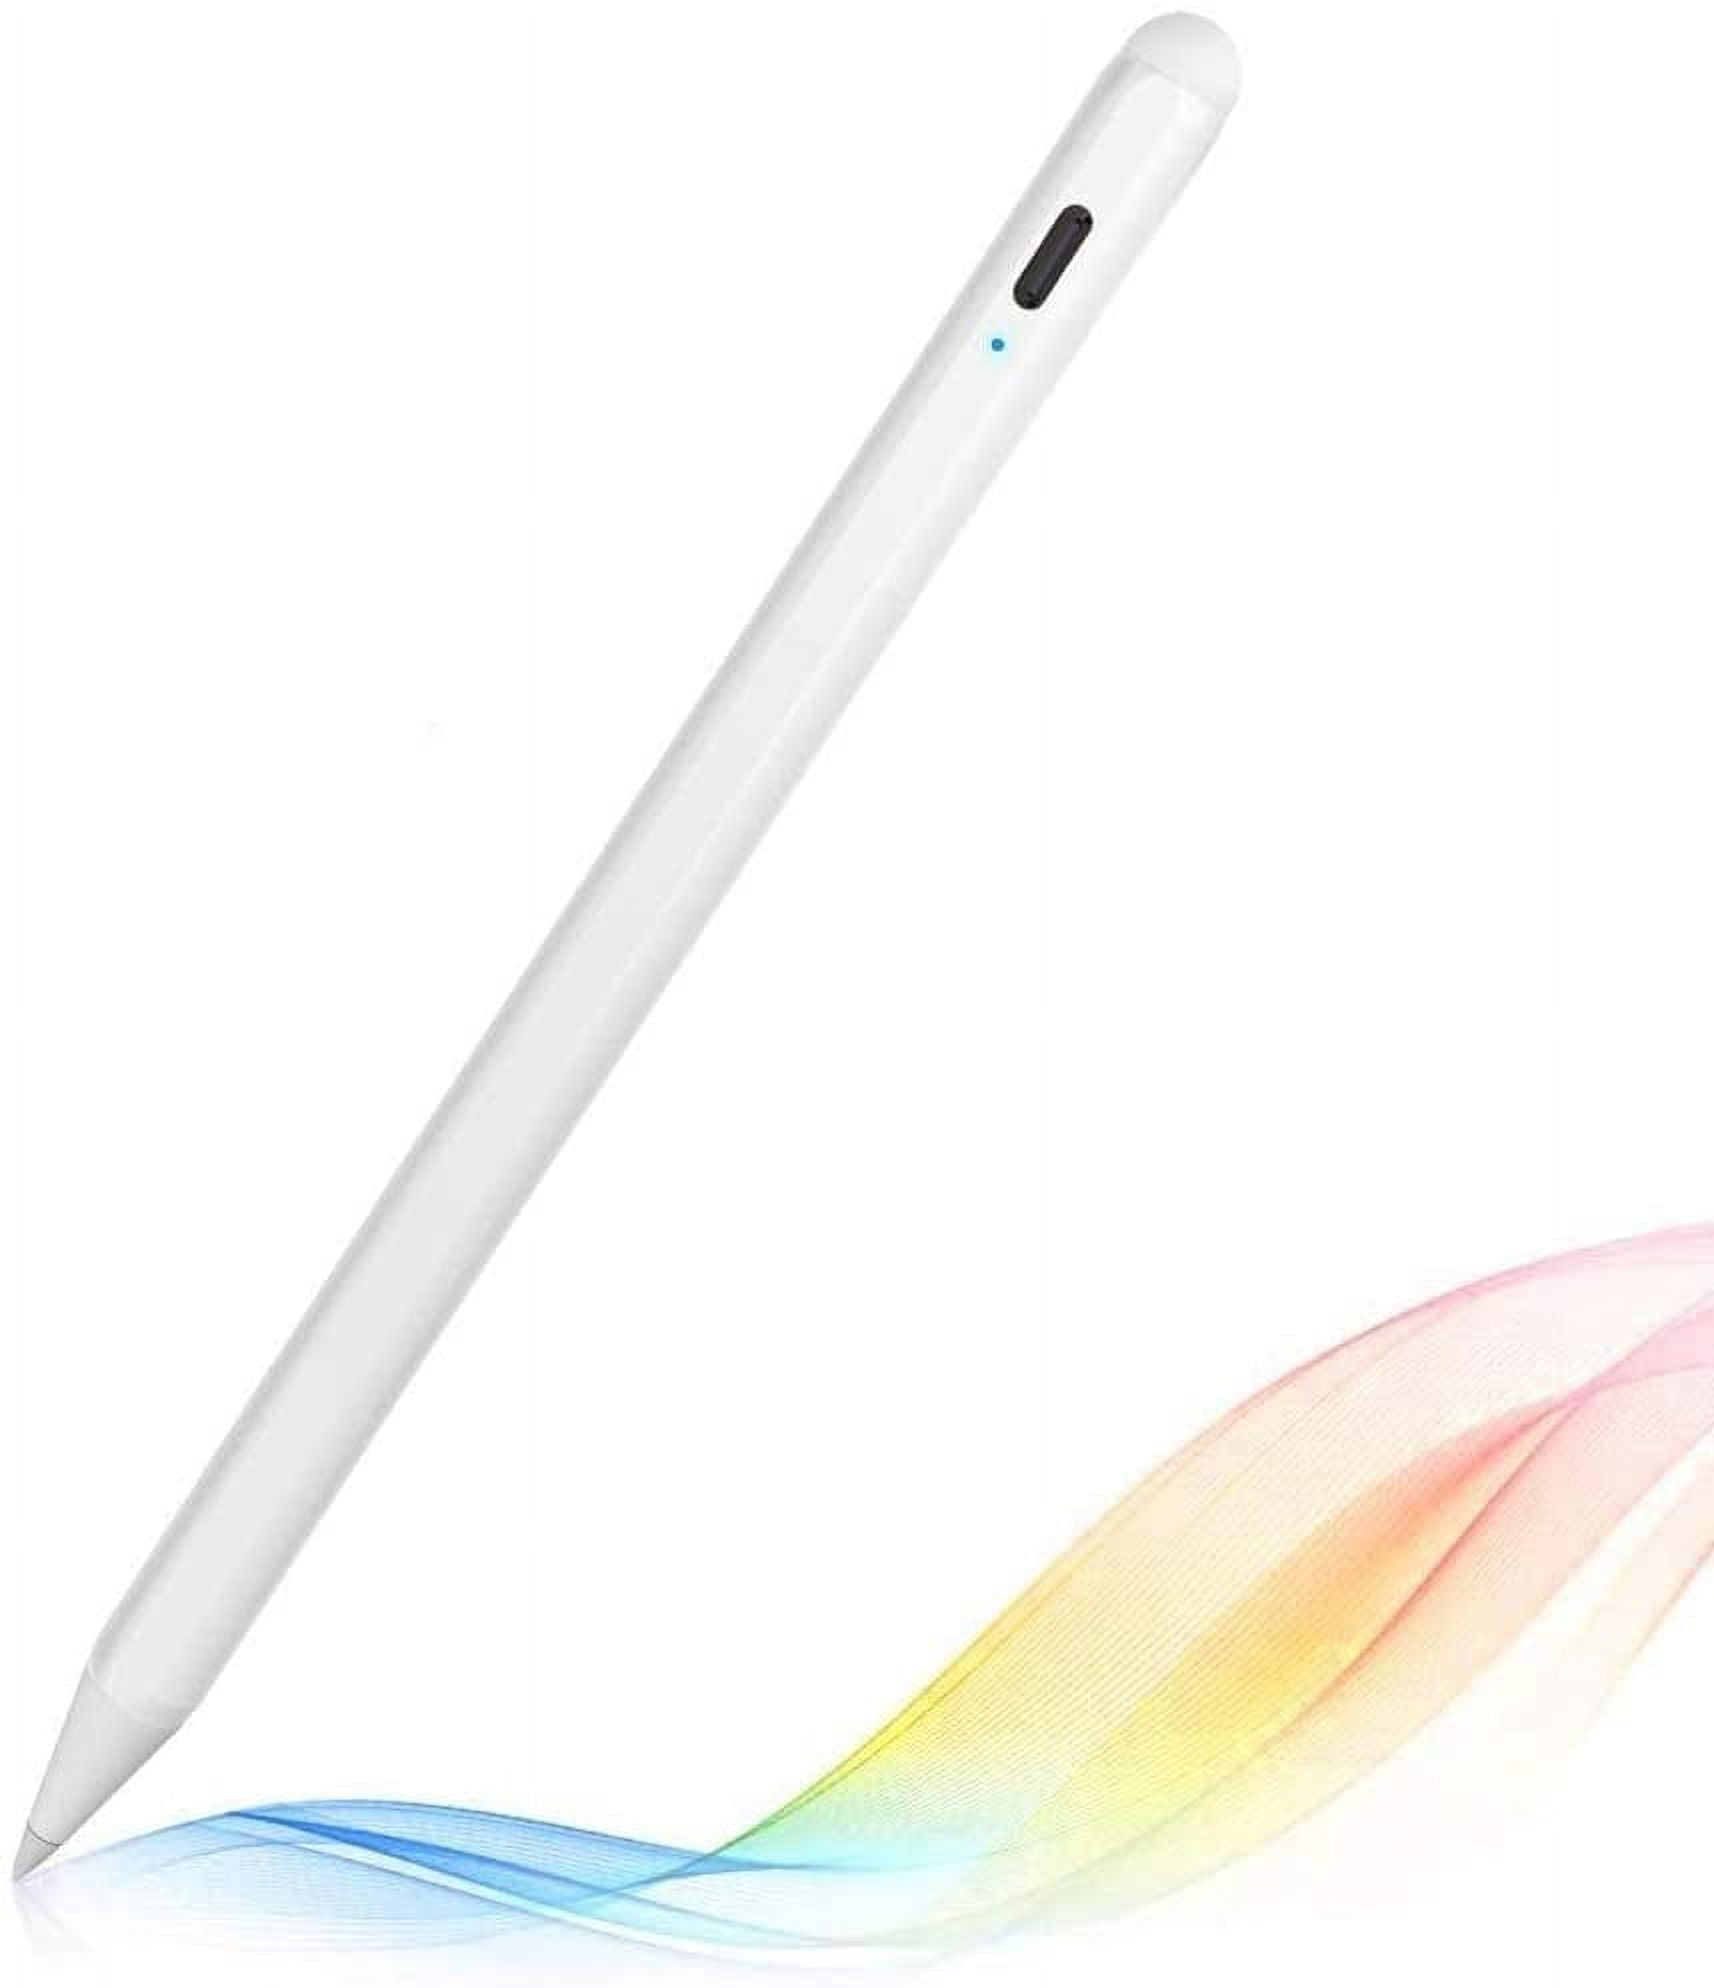 Active Stylus Pen, EEEkit Touch Screen Stylus Pencil Fit for  iPad/Pro/Air/Mini, High Sensitivity Stylus Pen for Writing/Drawing - White